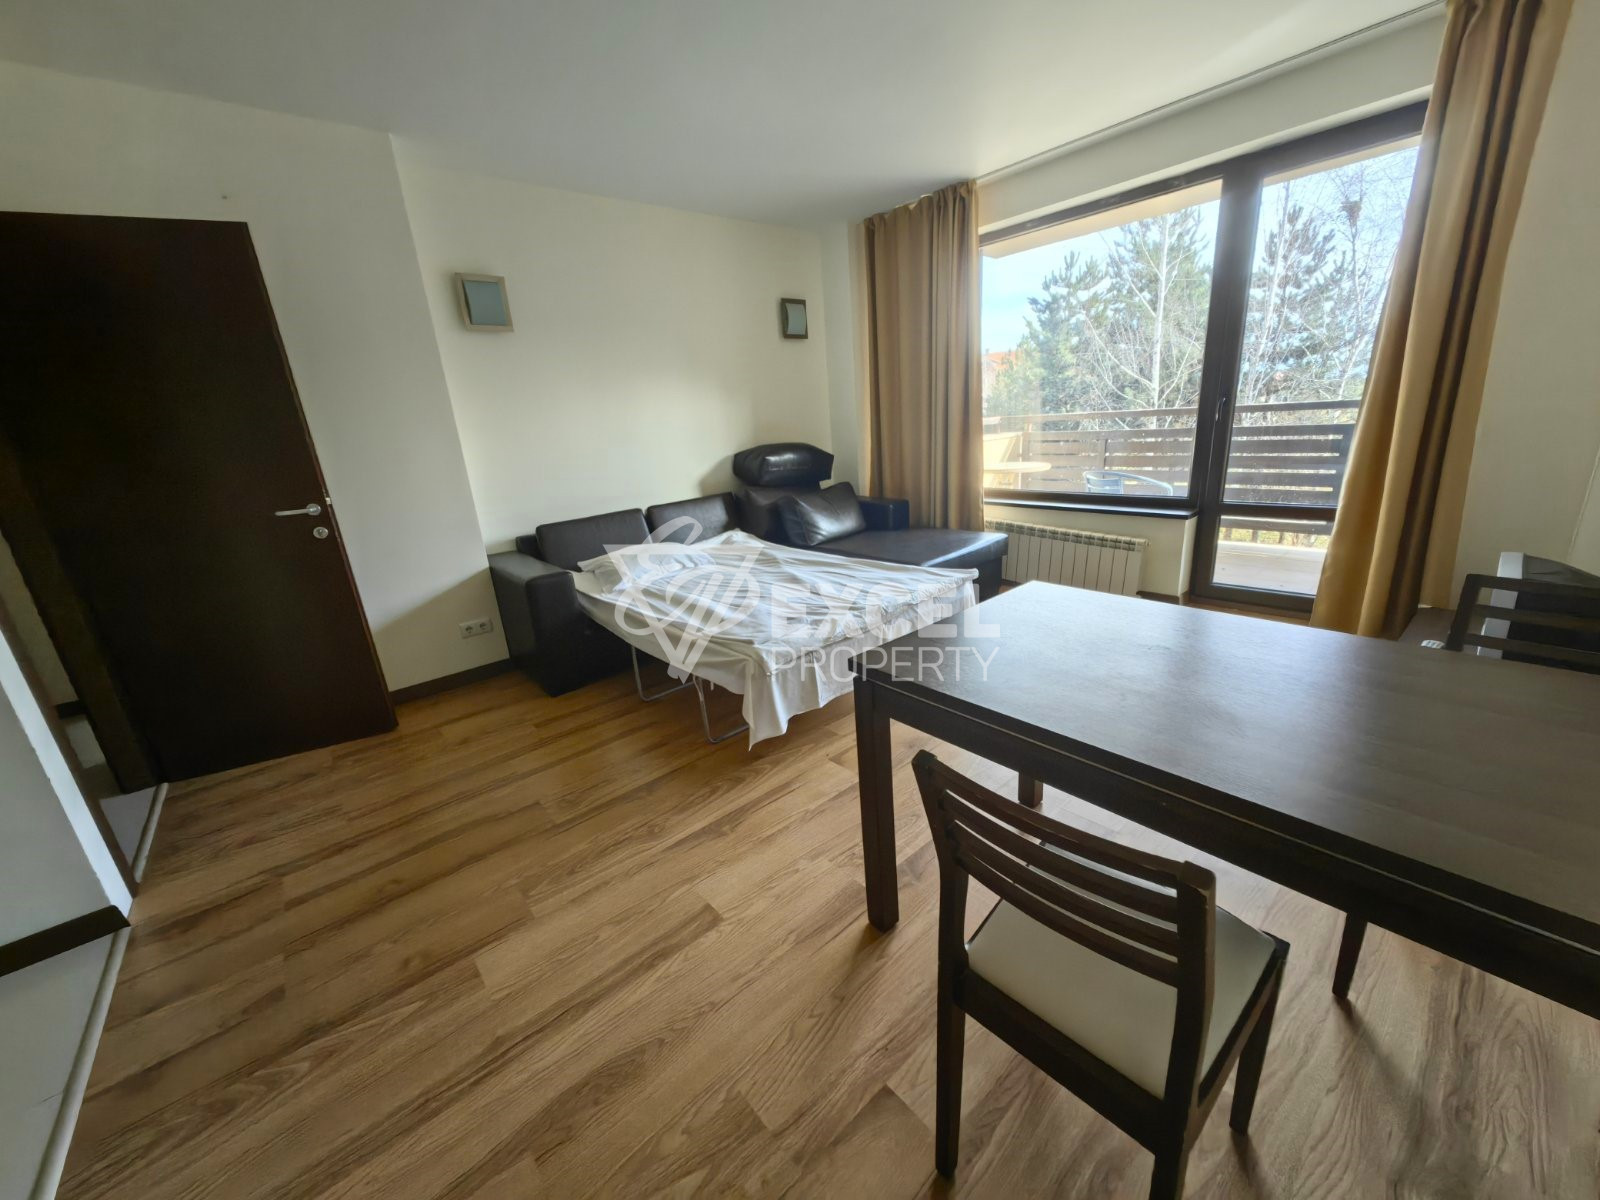 Exclusive property for sale: Two-bedroom apartment with a magnificent view of the Pirin peaks